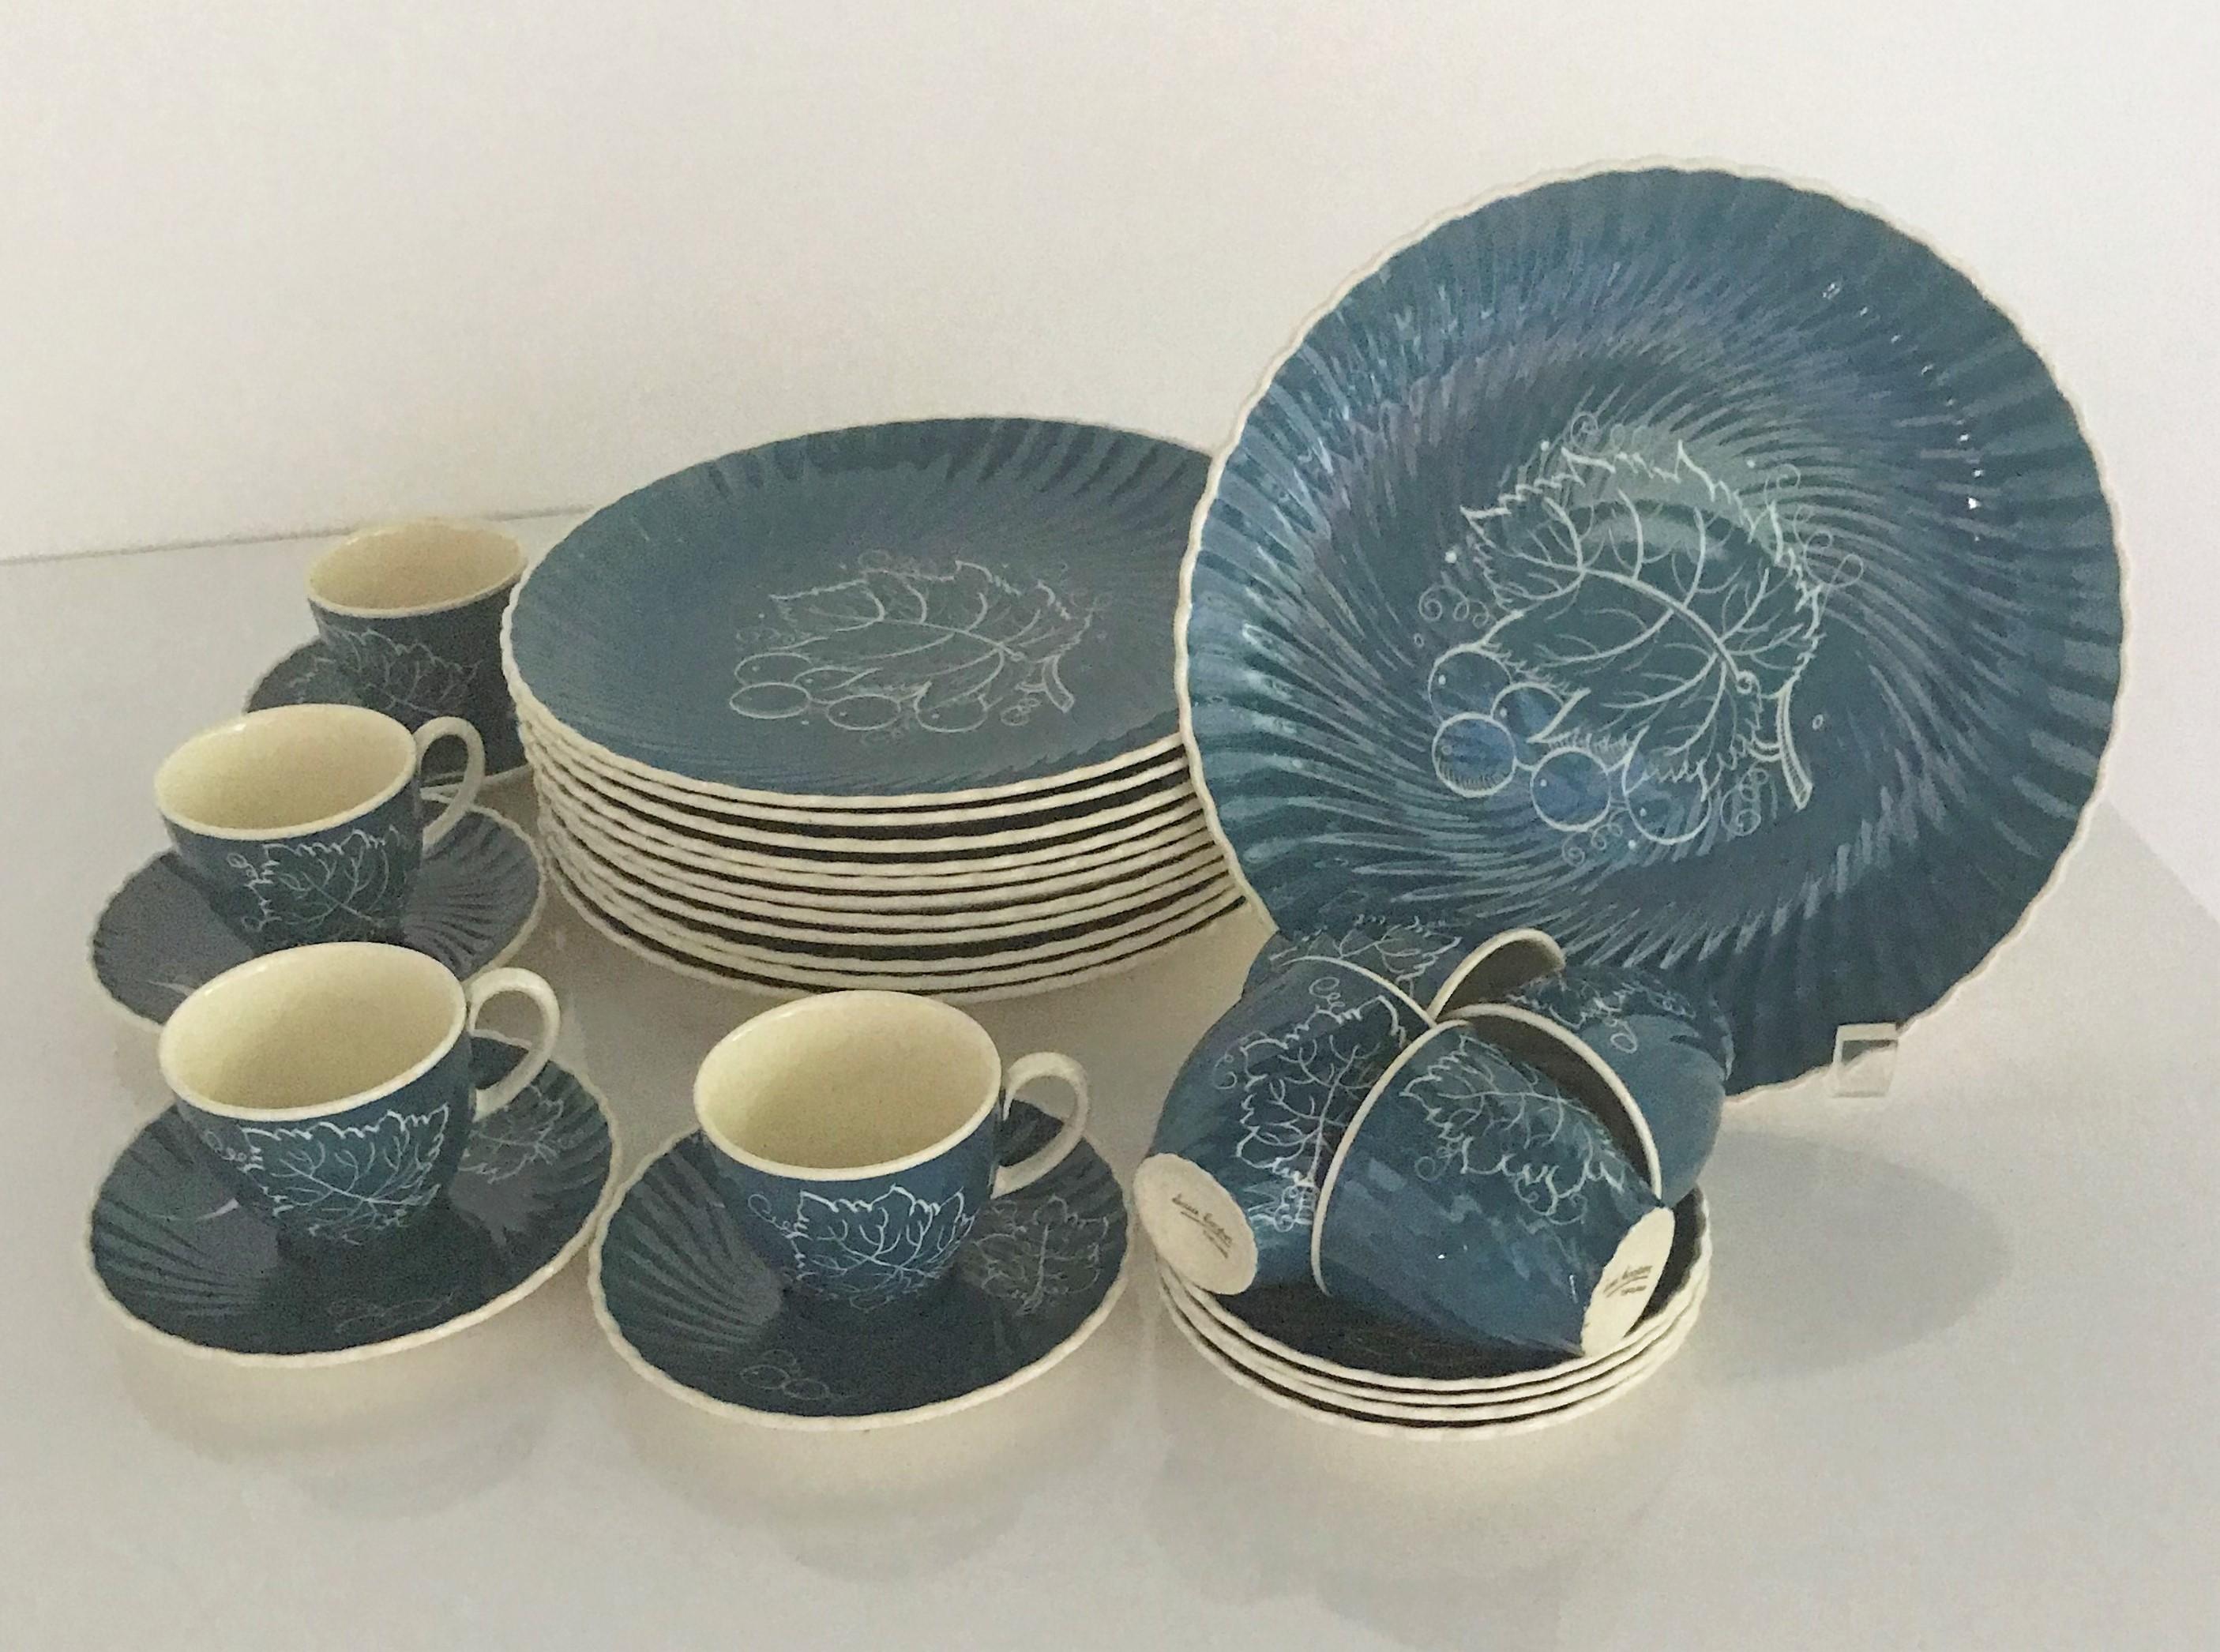 Susie Copper's 1930s Breakfast / Luncheon set of 8 Demitasse cups / saucers and 12 plates in blue background and white hand painted underglaze decoration of Grape Leaves and Grapes. The plates' and saucers' rims with a swirl or scalloped pattern.